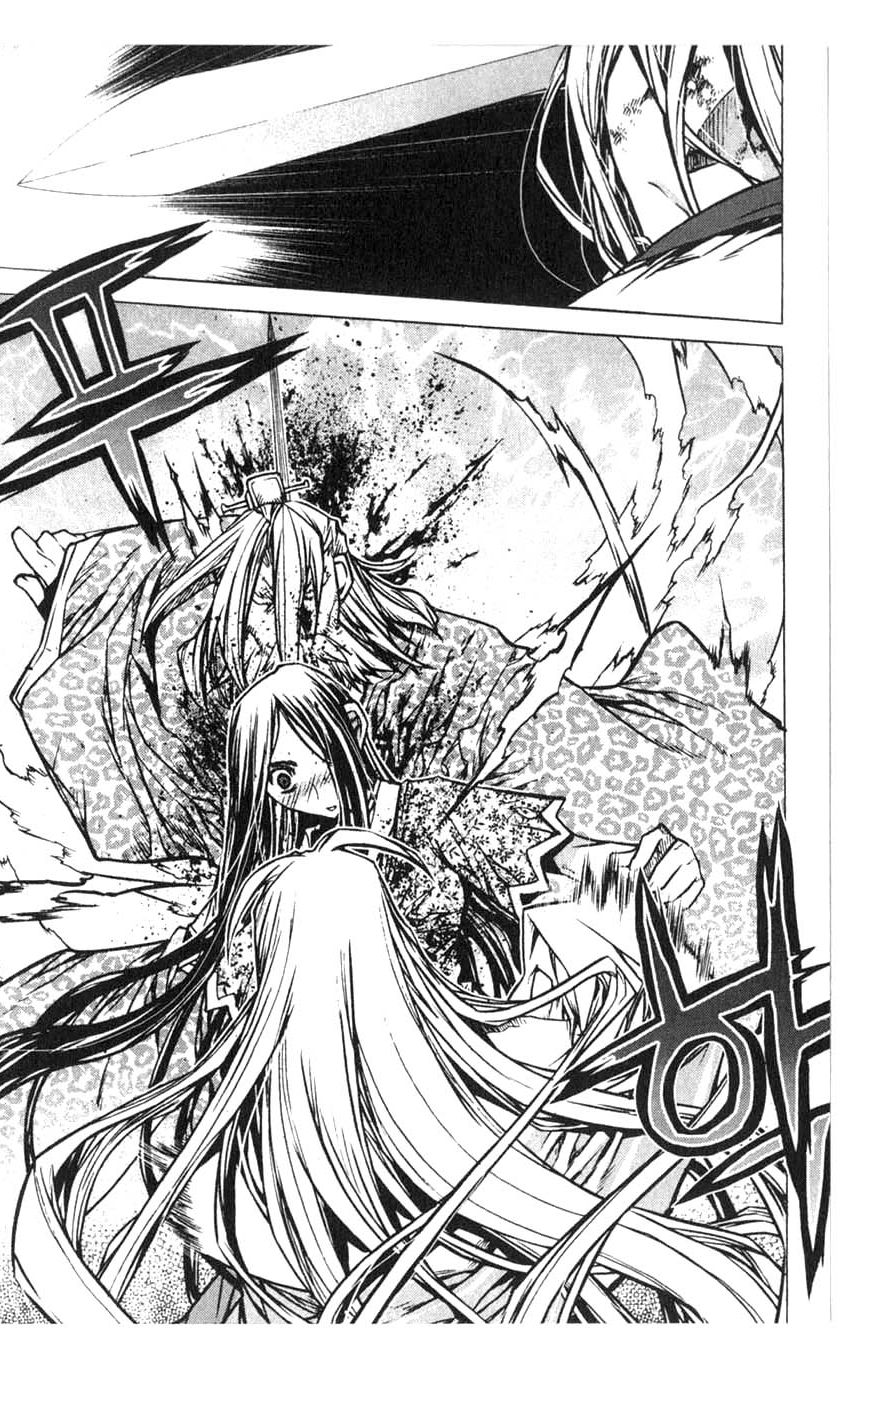 Chronicles of the Cursed Sword Vol. 18 Ch. 73 Taorun's Past